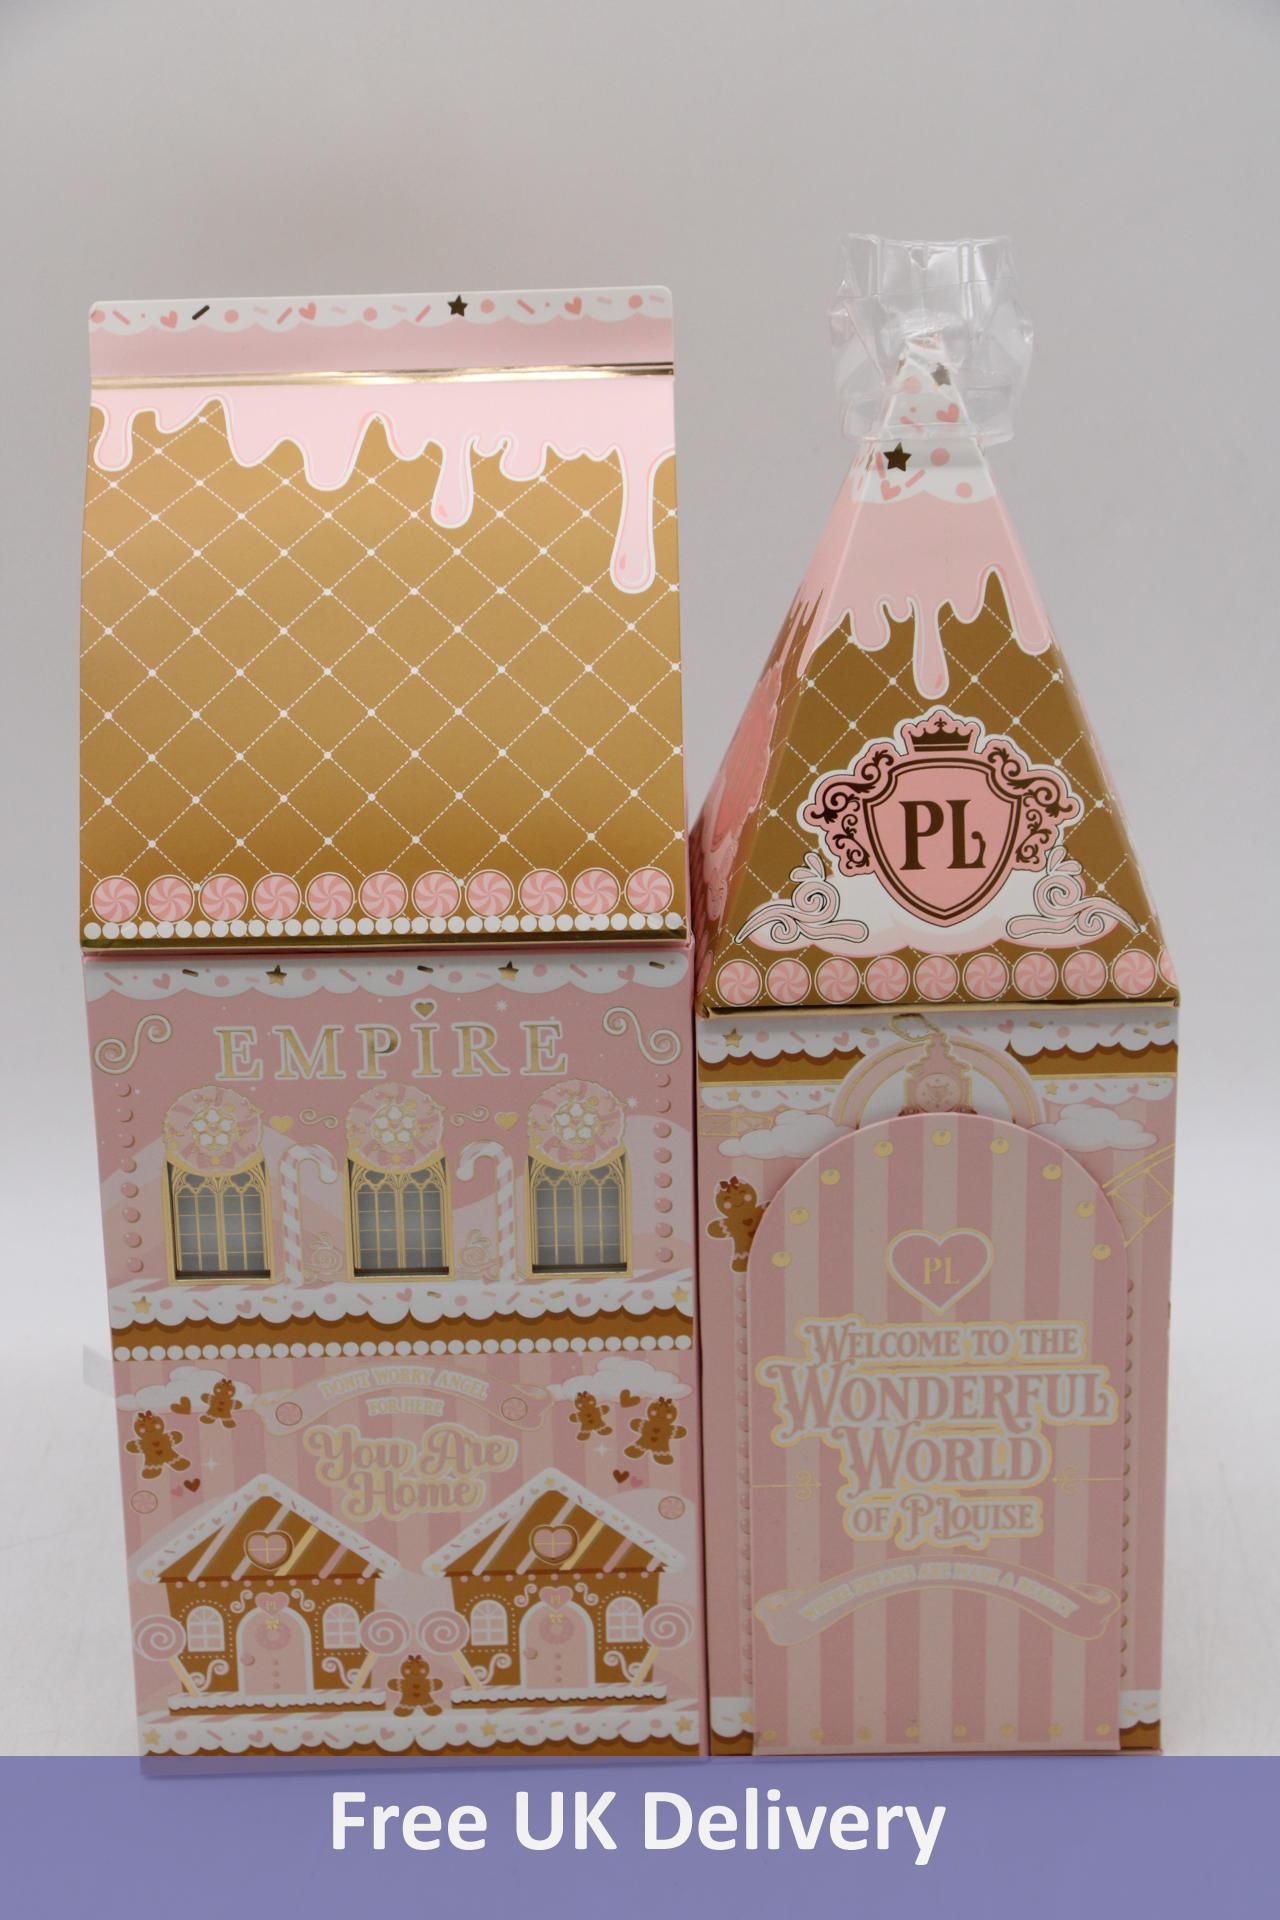 P.Louise The Wonderful World of Plouise Advent Calendar, Pink